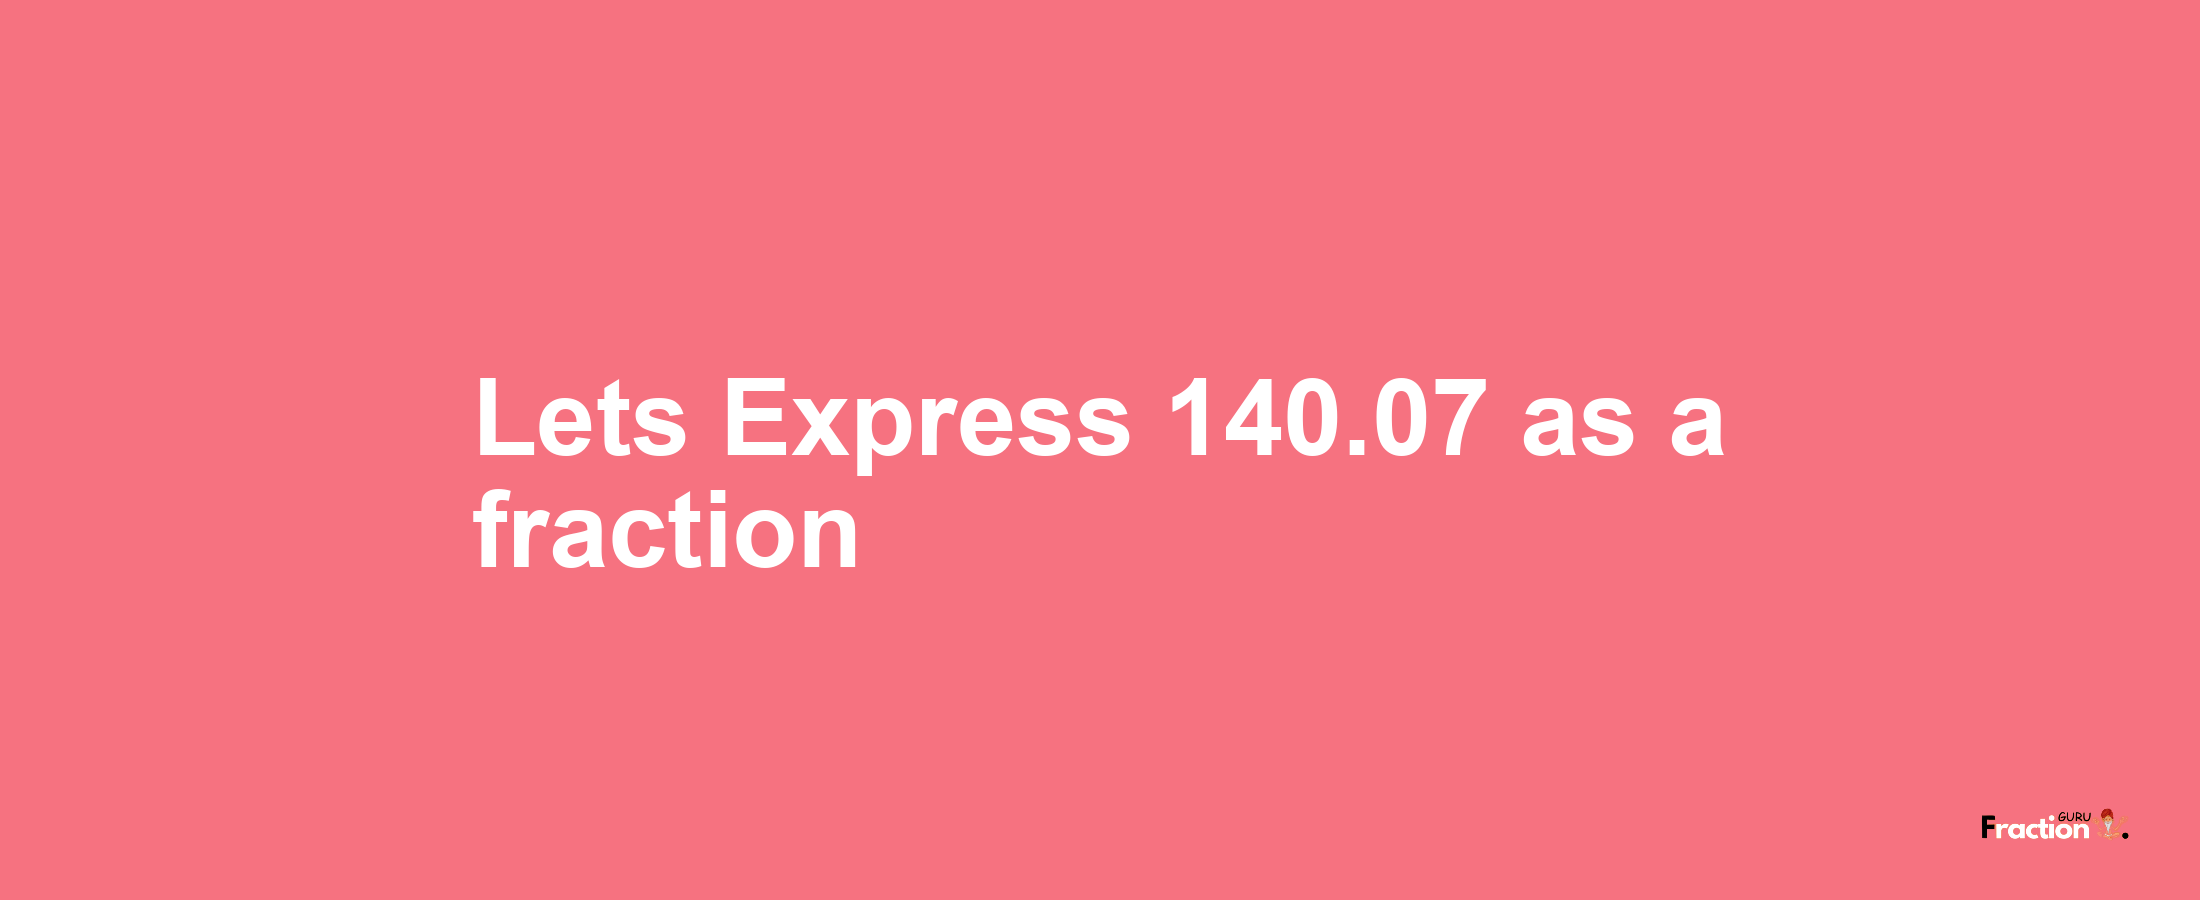 Lets Express 140.07 as afraction